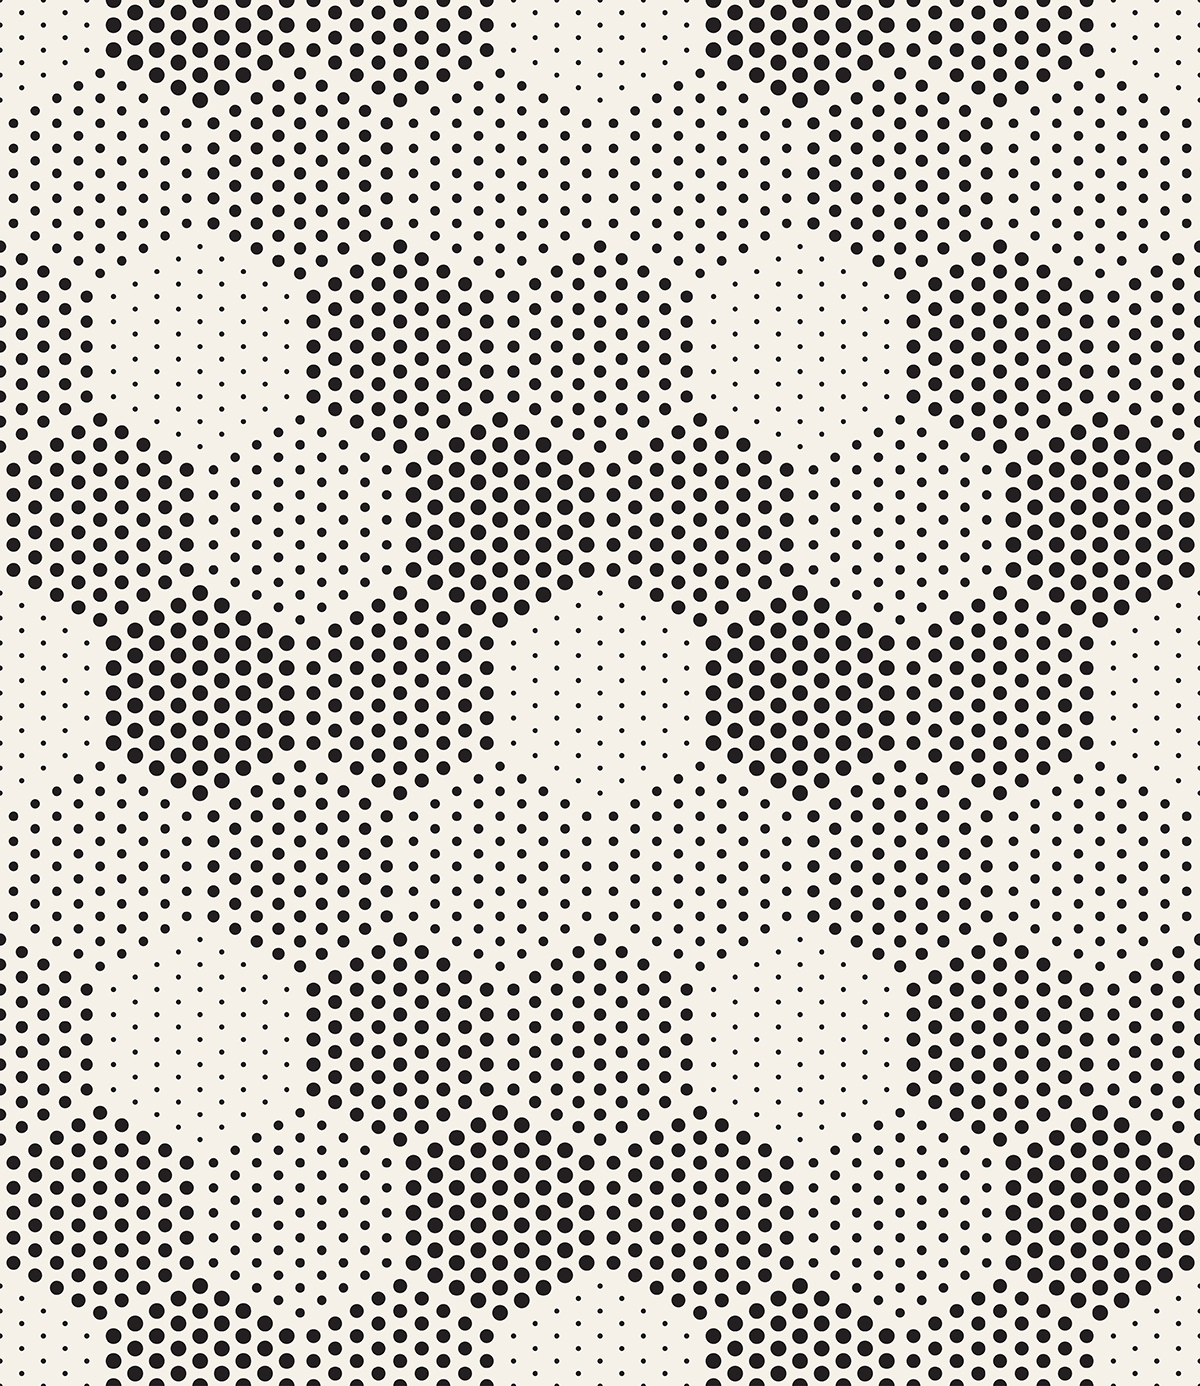 A black and white hexagon pattern